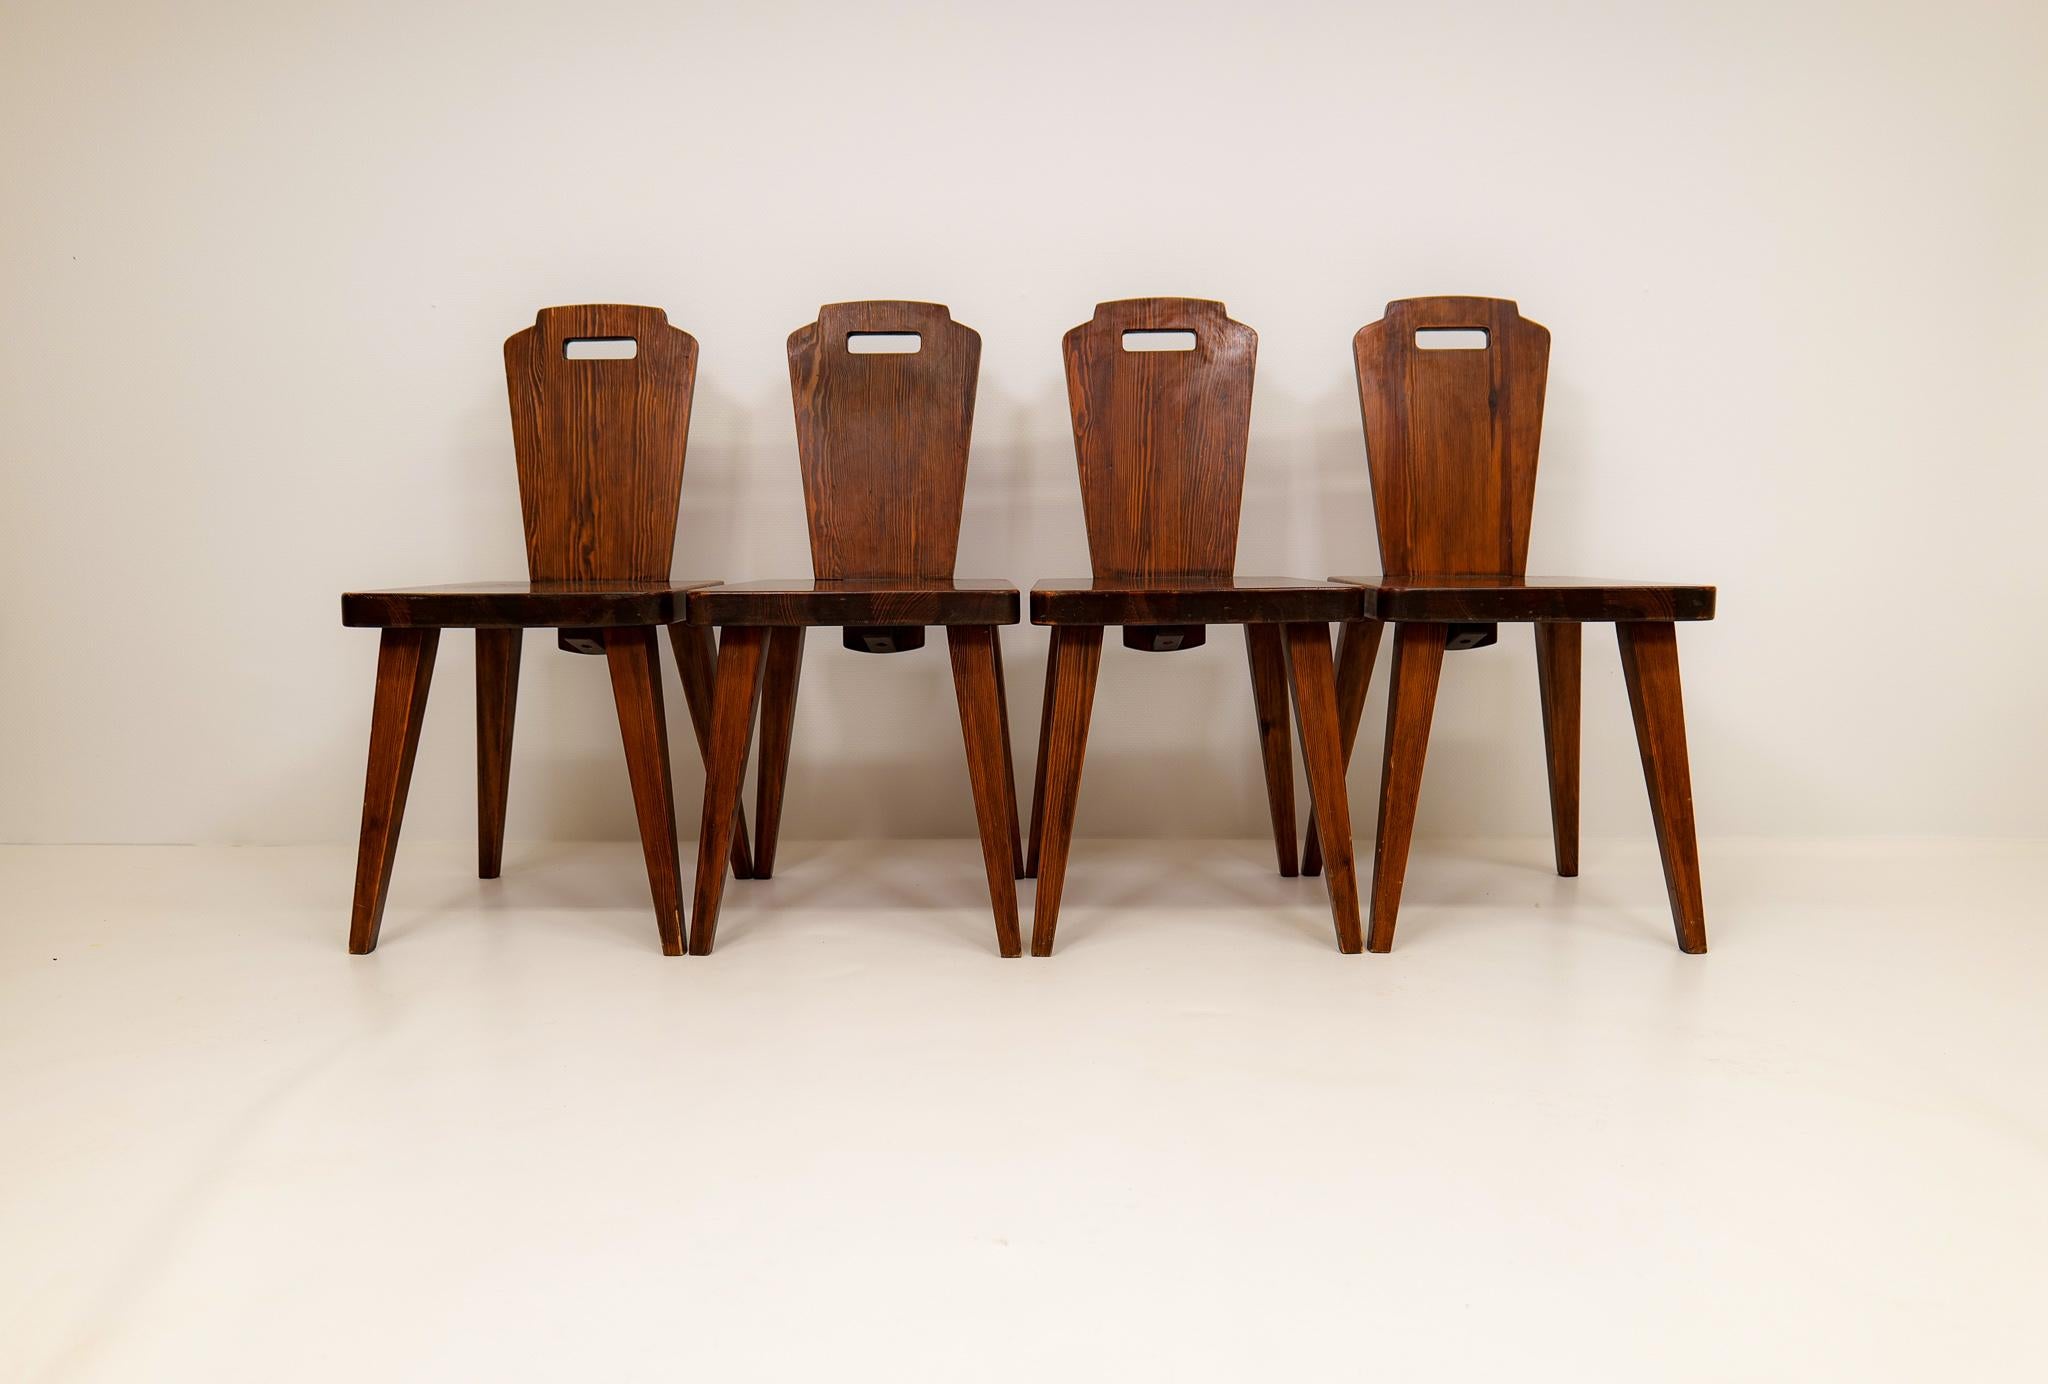 Stained pine dining chairs attributed to Bo Fjaestad, Sweden.
Similar to the 